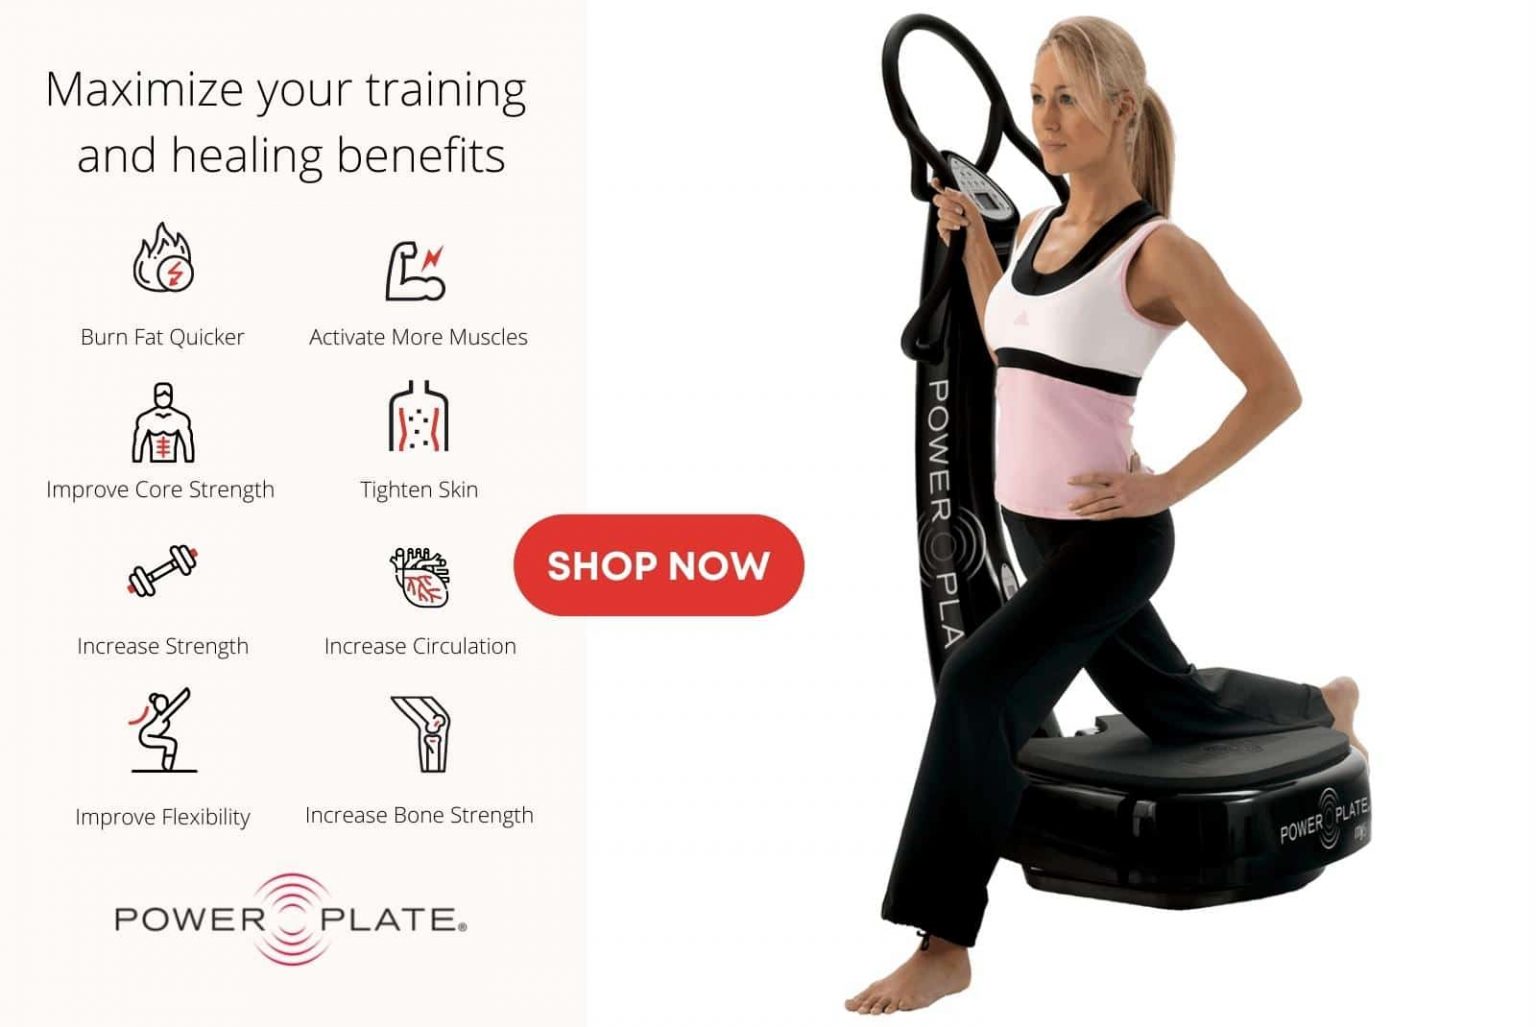 Maximize your training and health benefits with the Power Plate my5